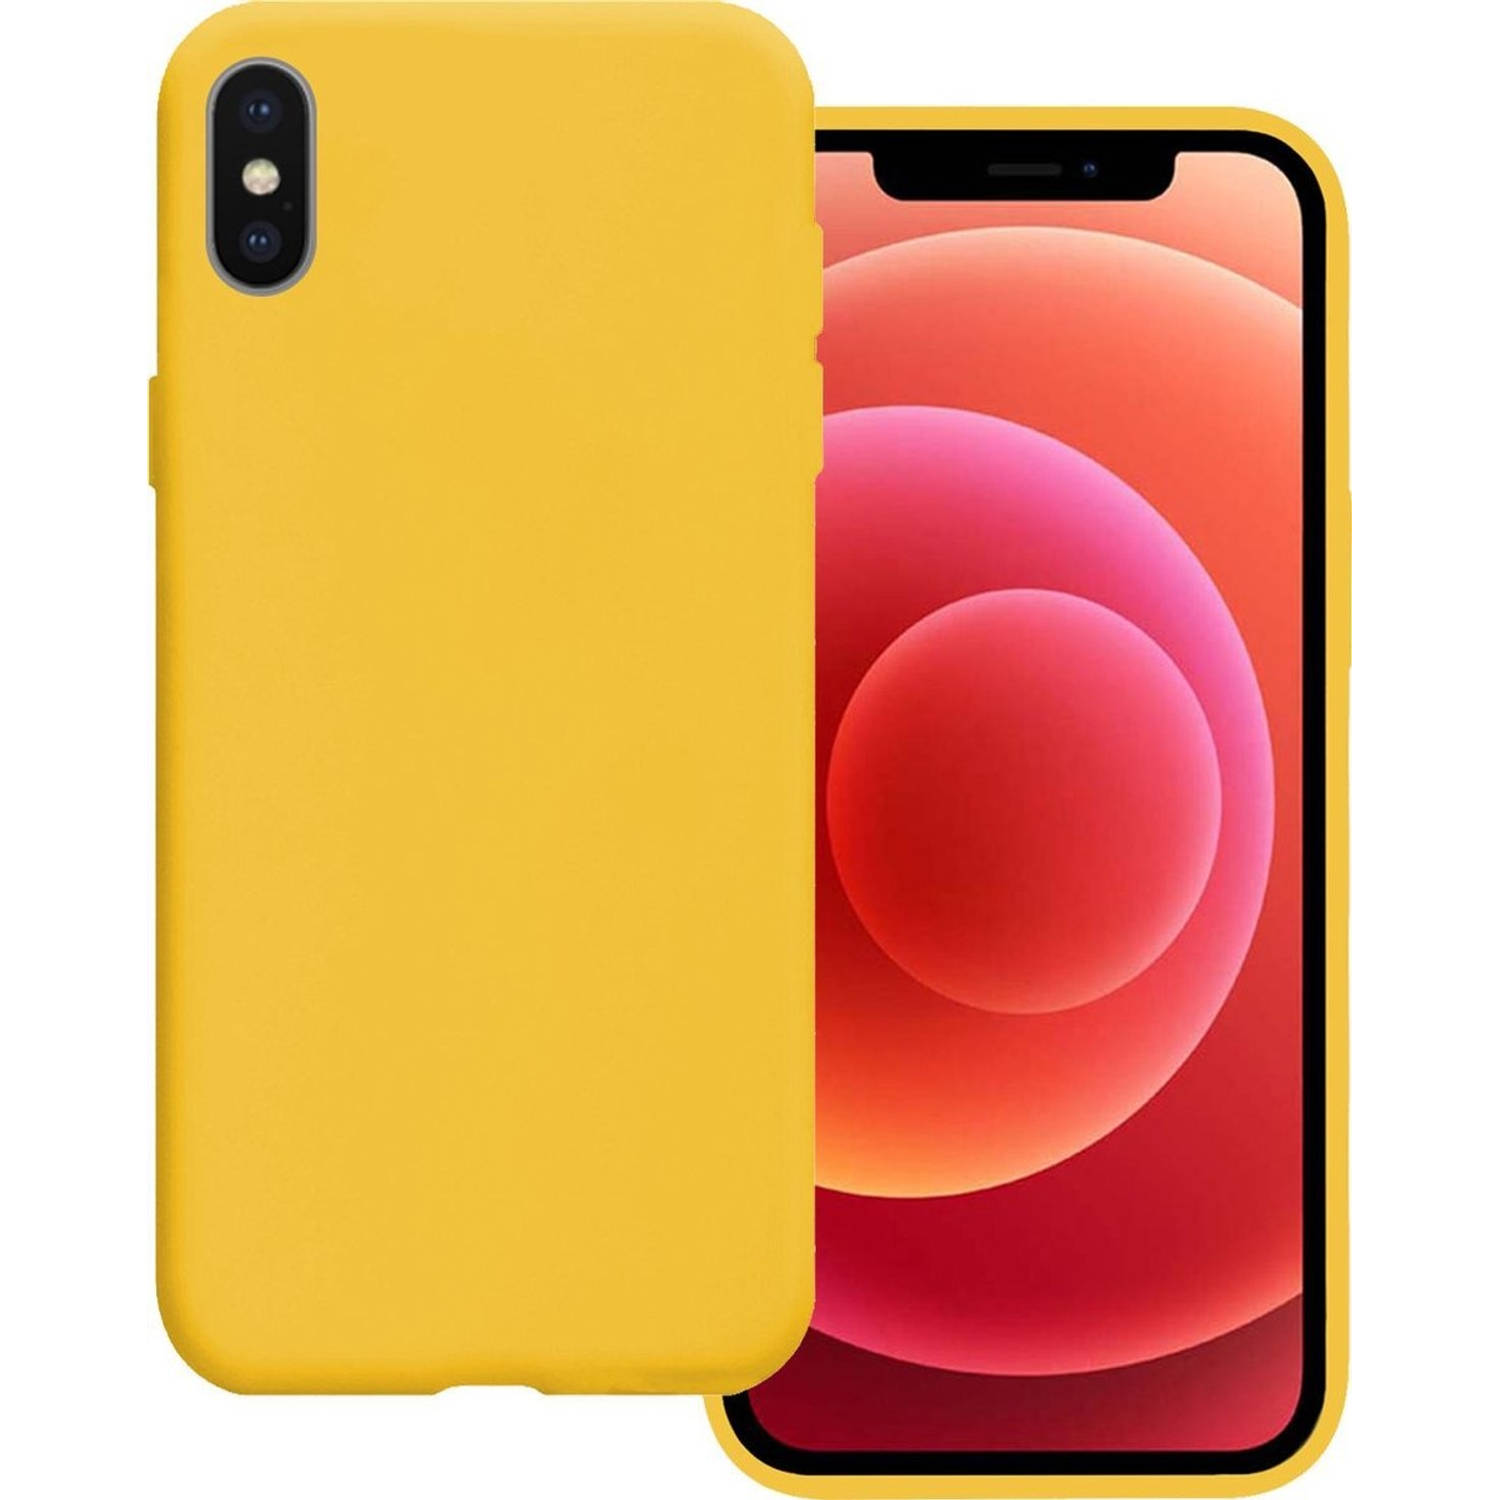 Basey iPhone X Hoesje Siliconen Hoes Case Cover iPhone X-Geel